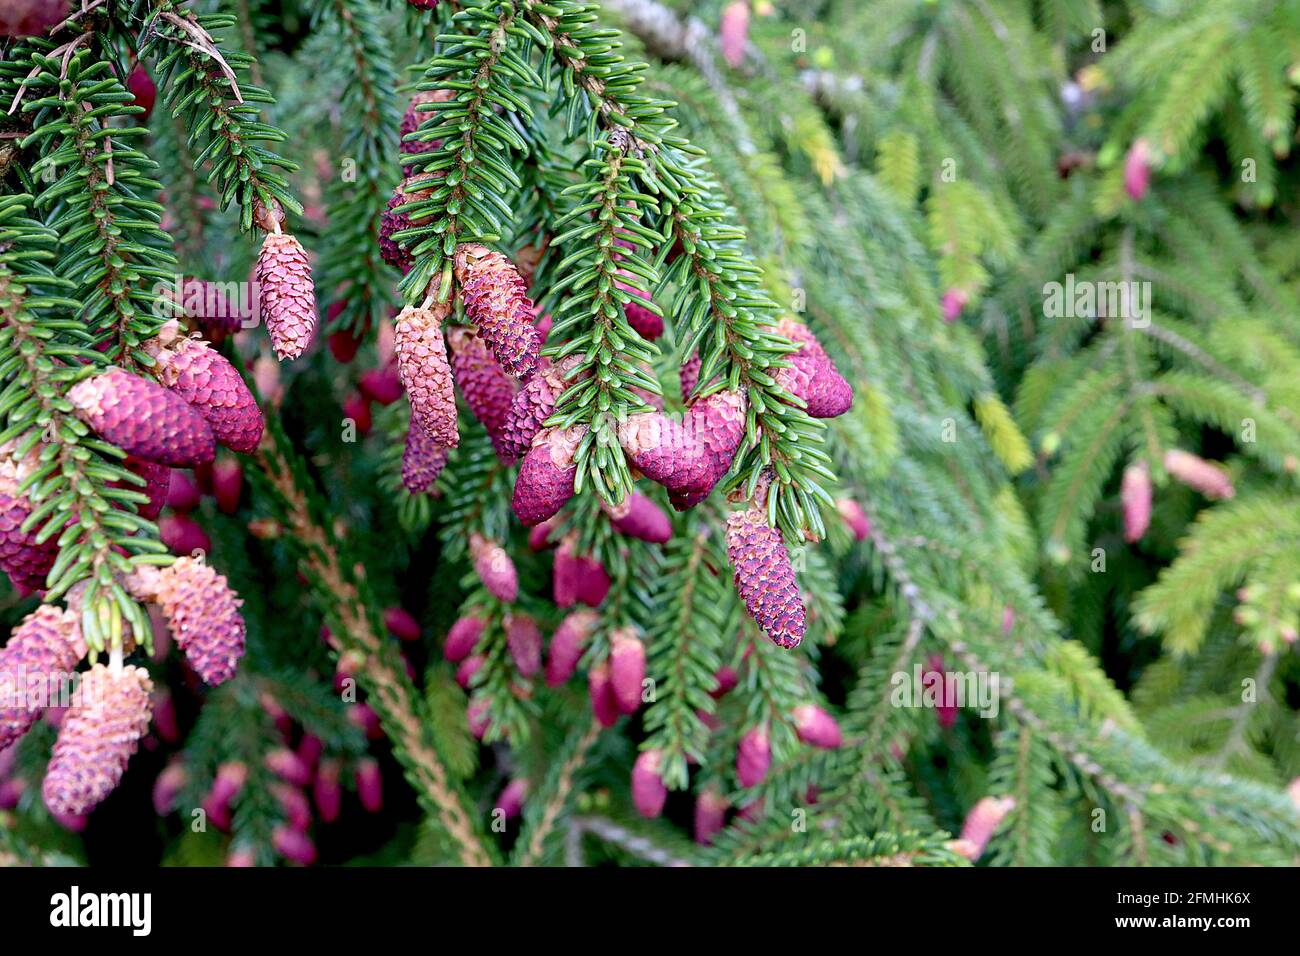 Picea orientalis ‘Pendula’  weeping oriental spruce – short cylindrical deep pink cones and pendulous branches with needle-like leaves,  May, England, Stock Photo